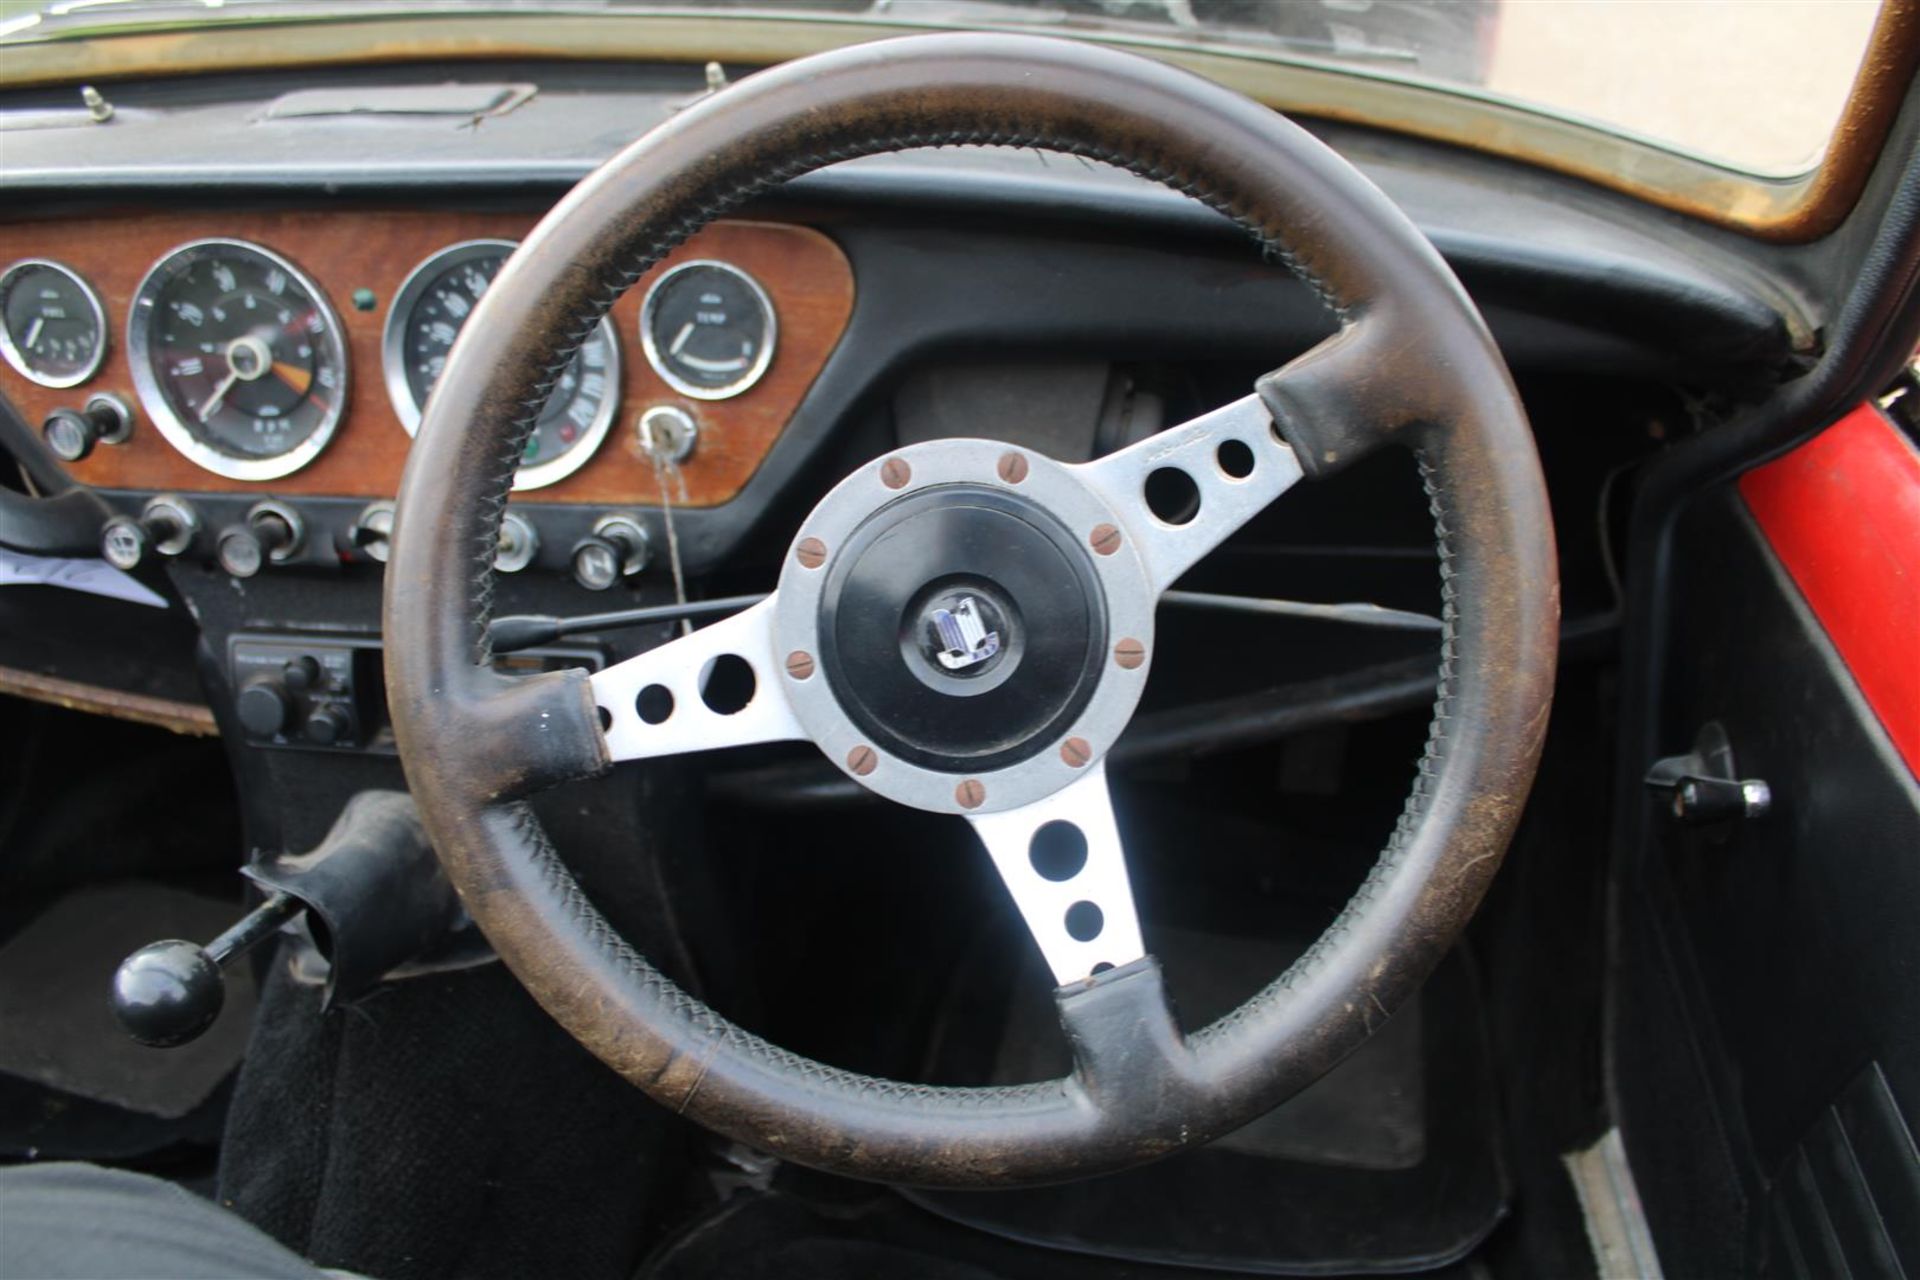 1970 Triumph Spitfire MKIII - Image 13 of 15